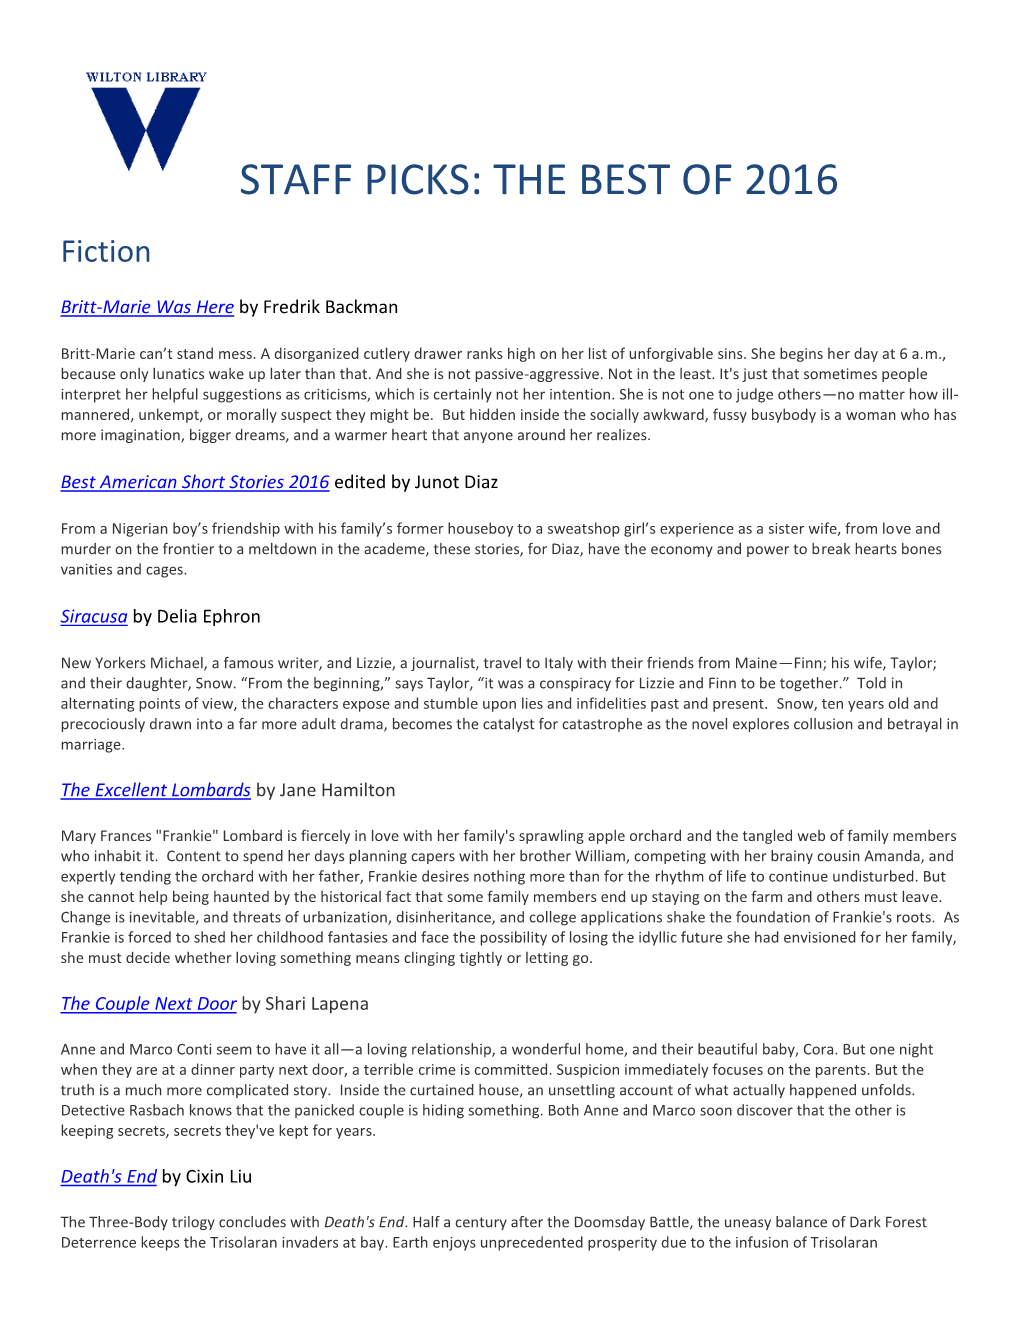 STAFF PICKS: the BEST of 2016 Fiction